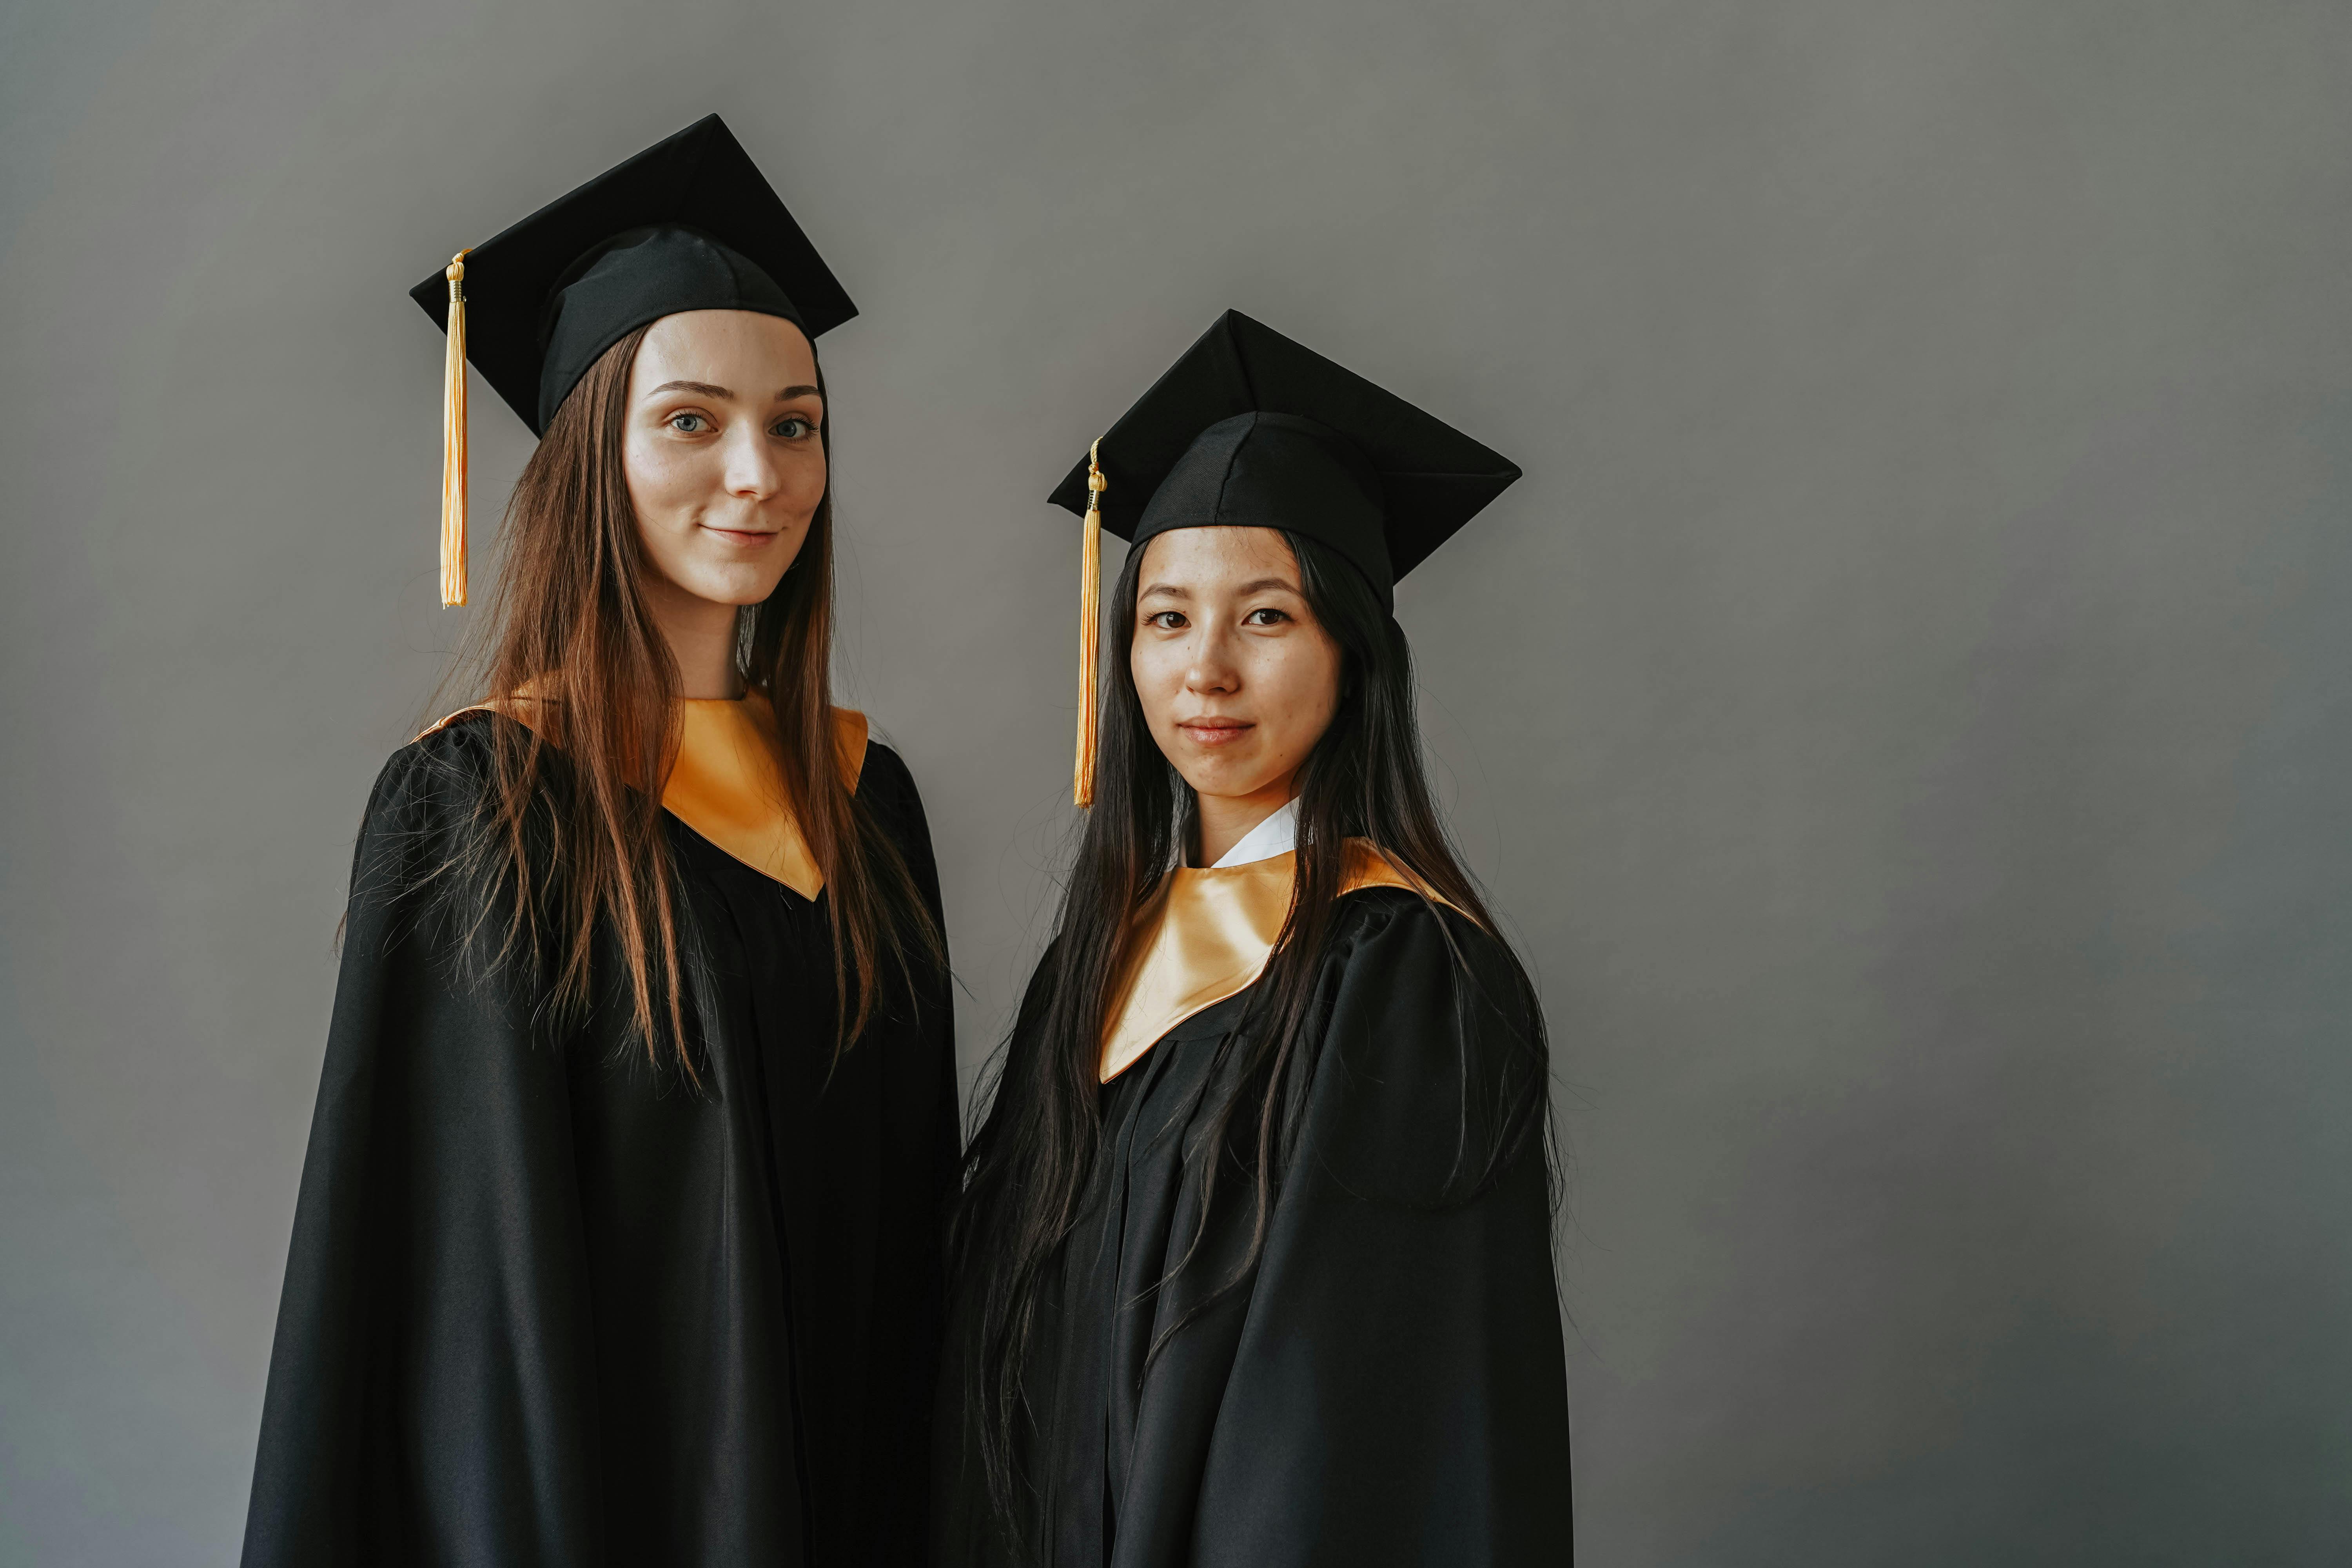 Graduation Gown Pictures  Download Free Images on Unsplash